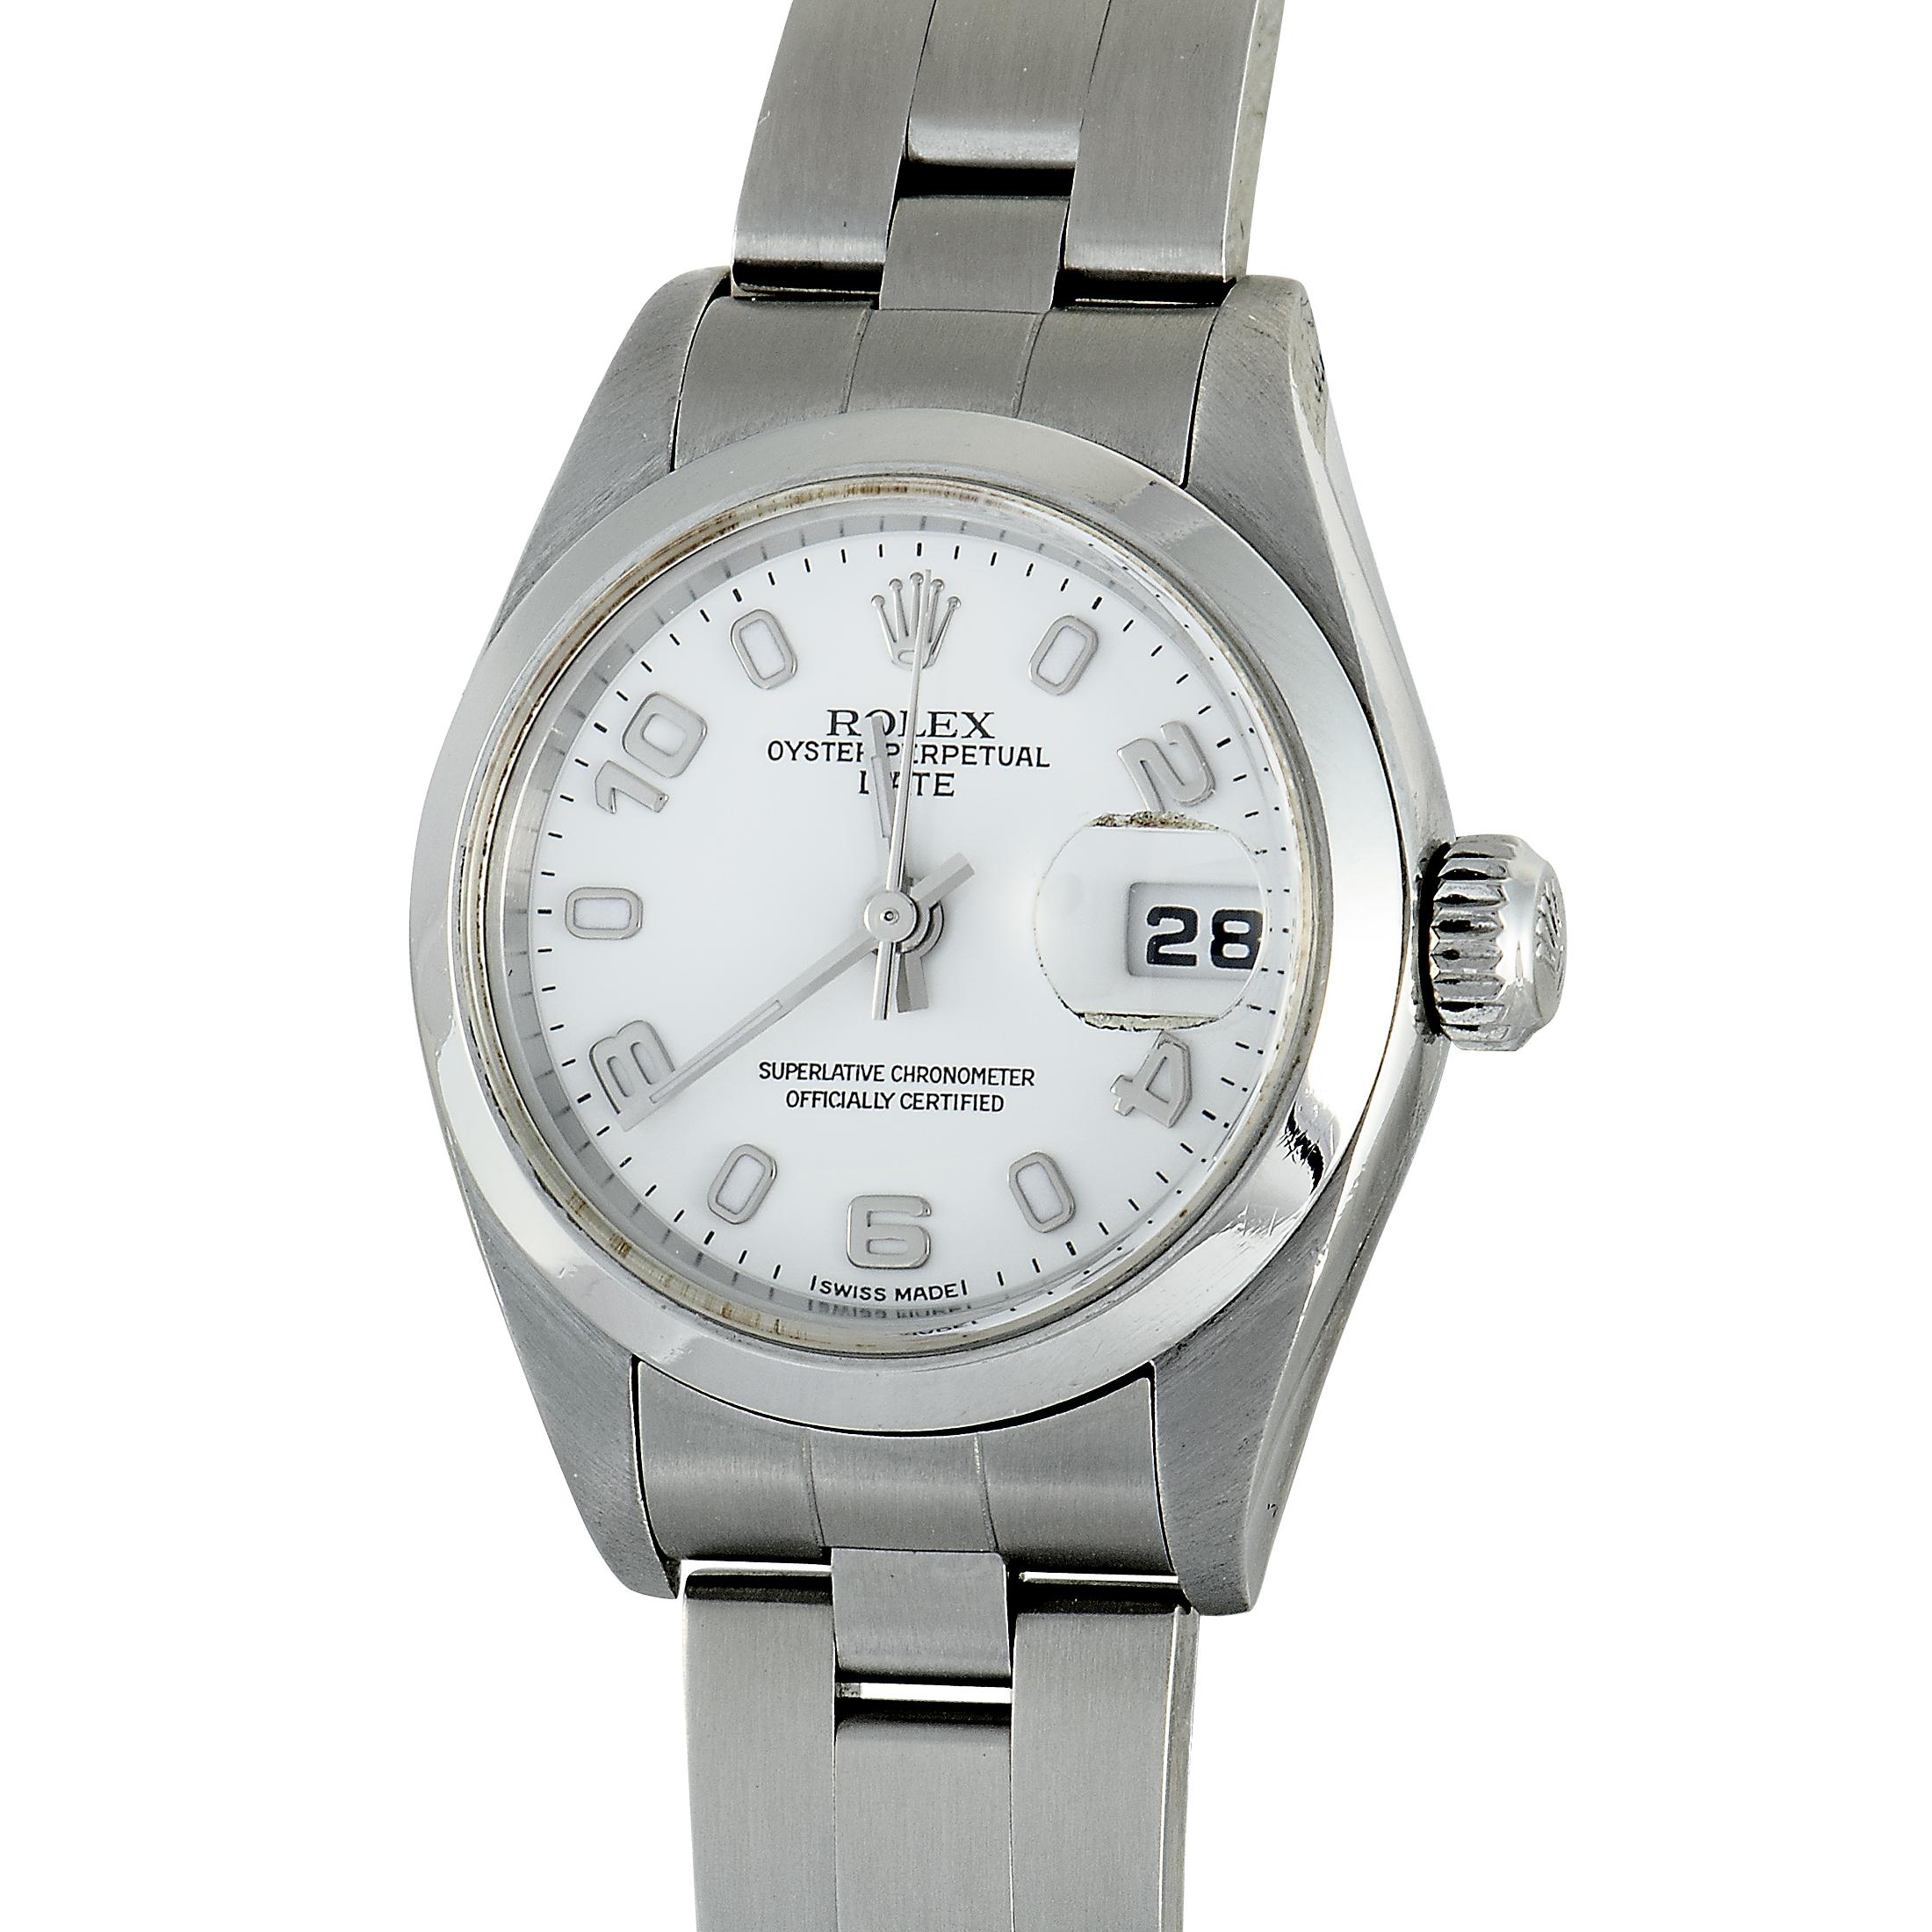 The Rolex Date, reference number 78240, boasts a stainless steel case that is mounted onto a matching stainless steel bracelet. The white dial with Arabic numerals features central hours, minutes and seconds, and date. The watch is powered by a